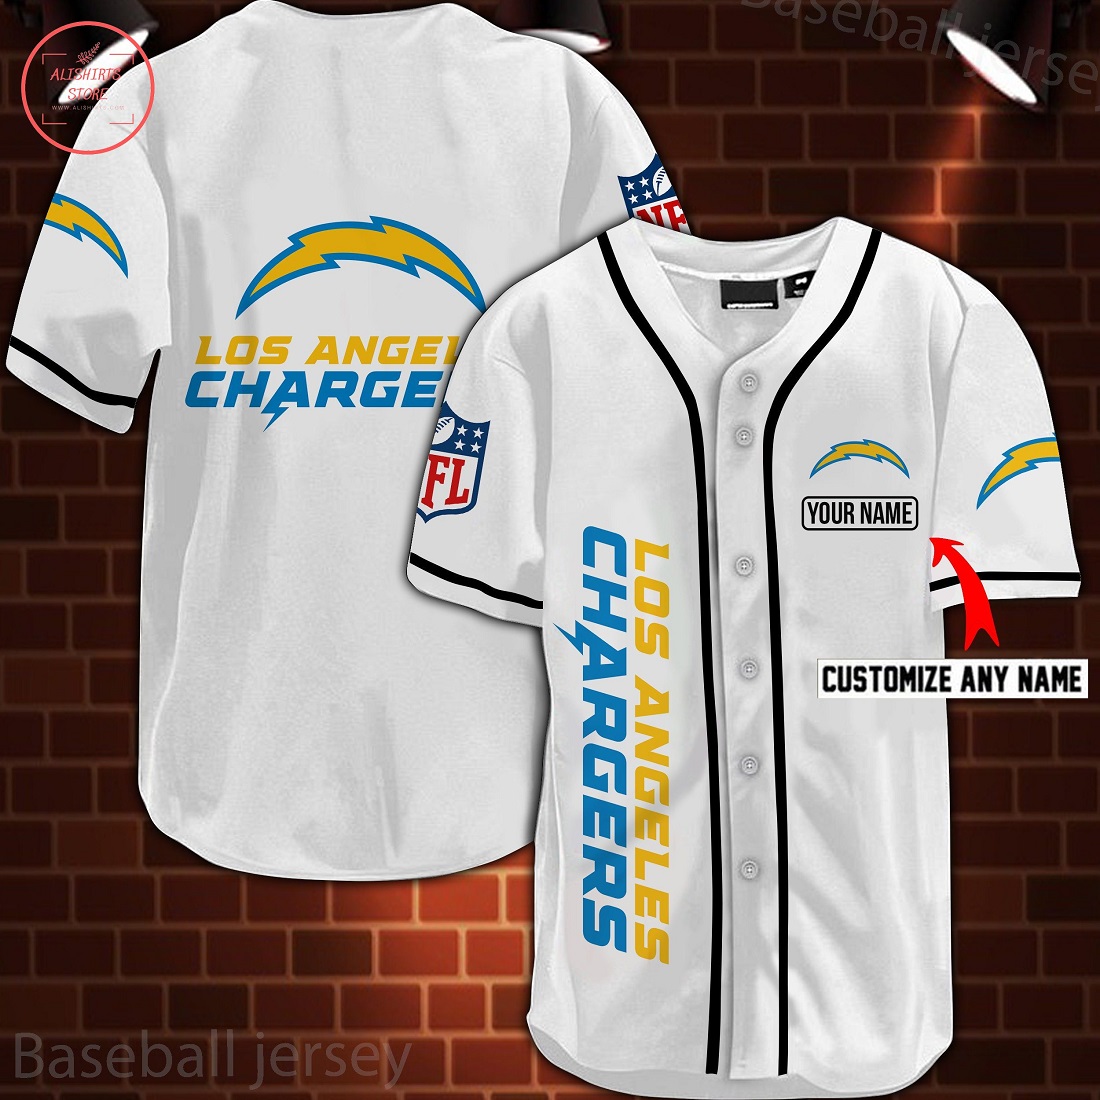 Nfl Los Angeles Chargers Personalized Baseball Jersey